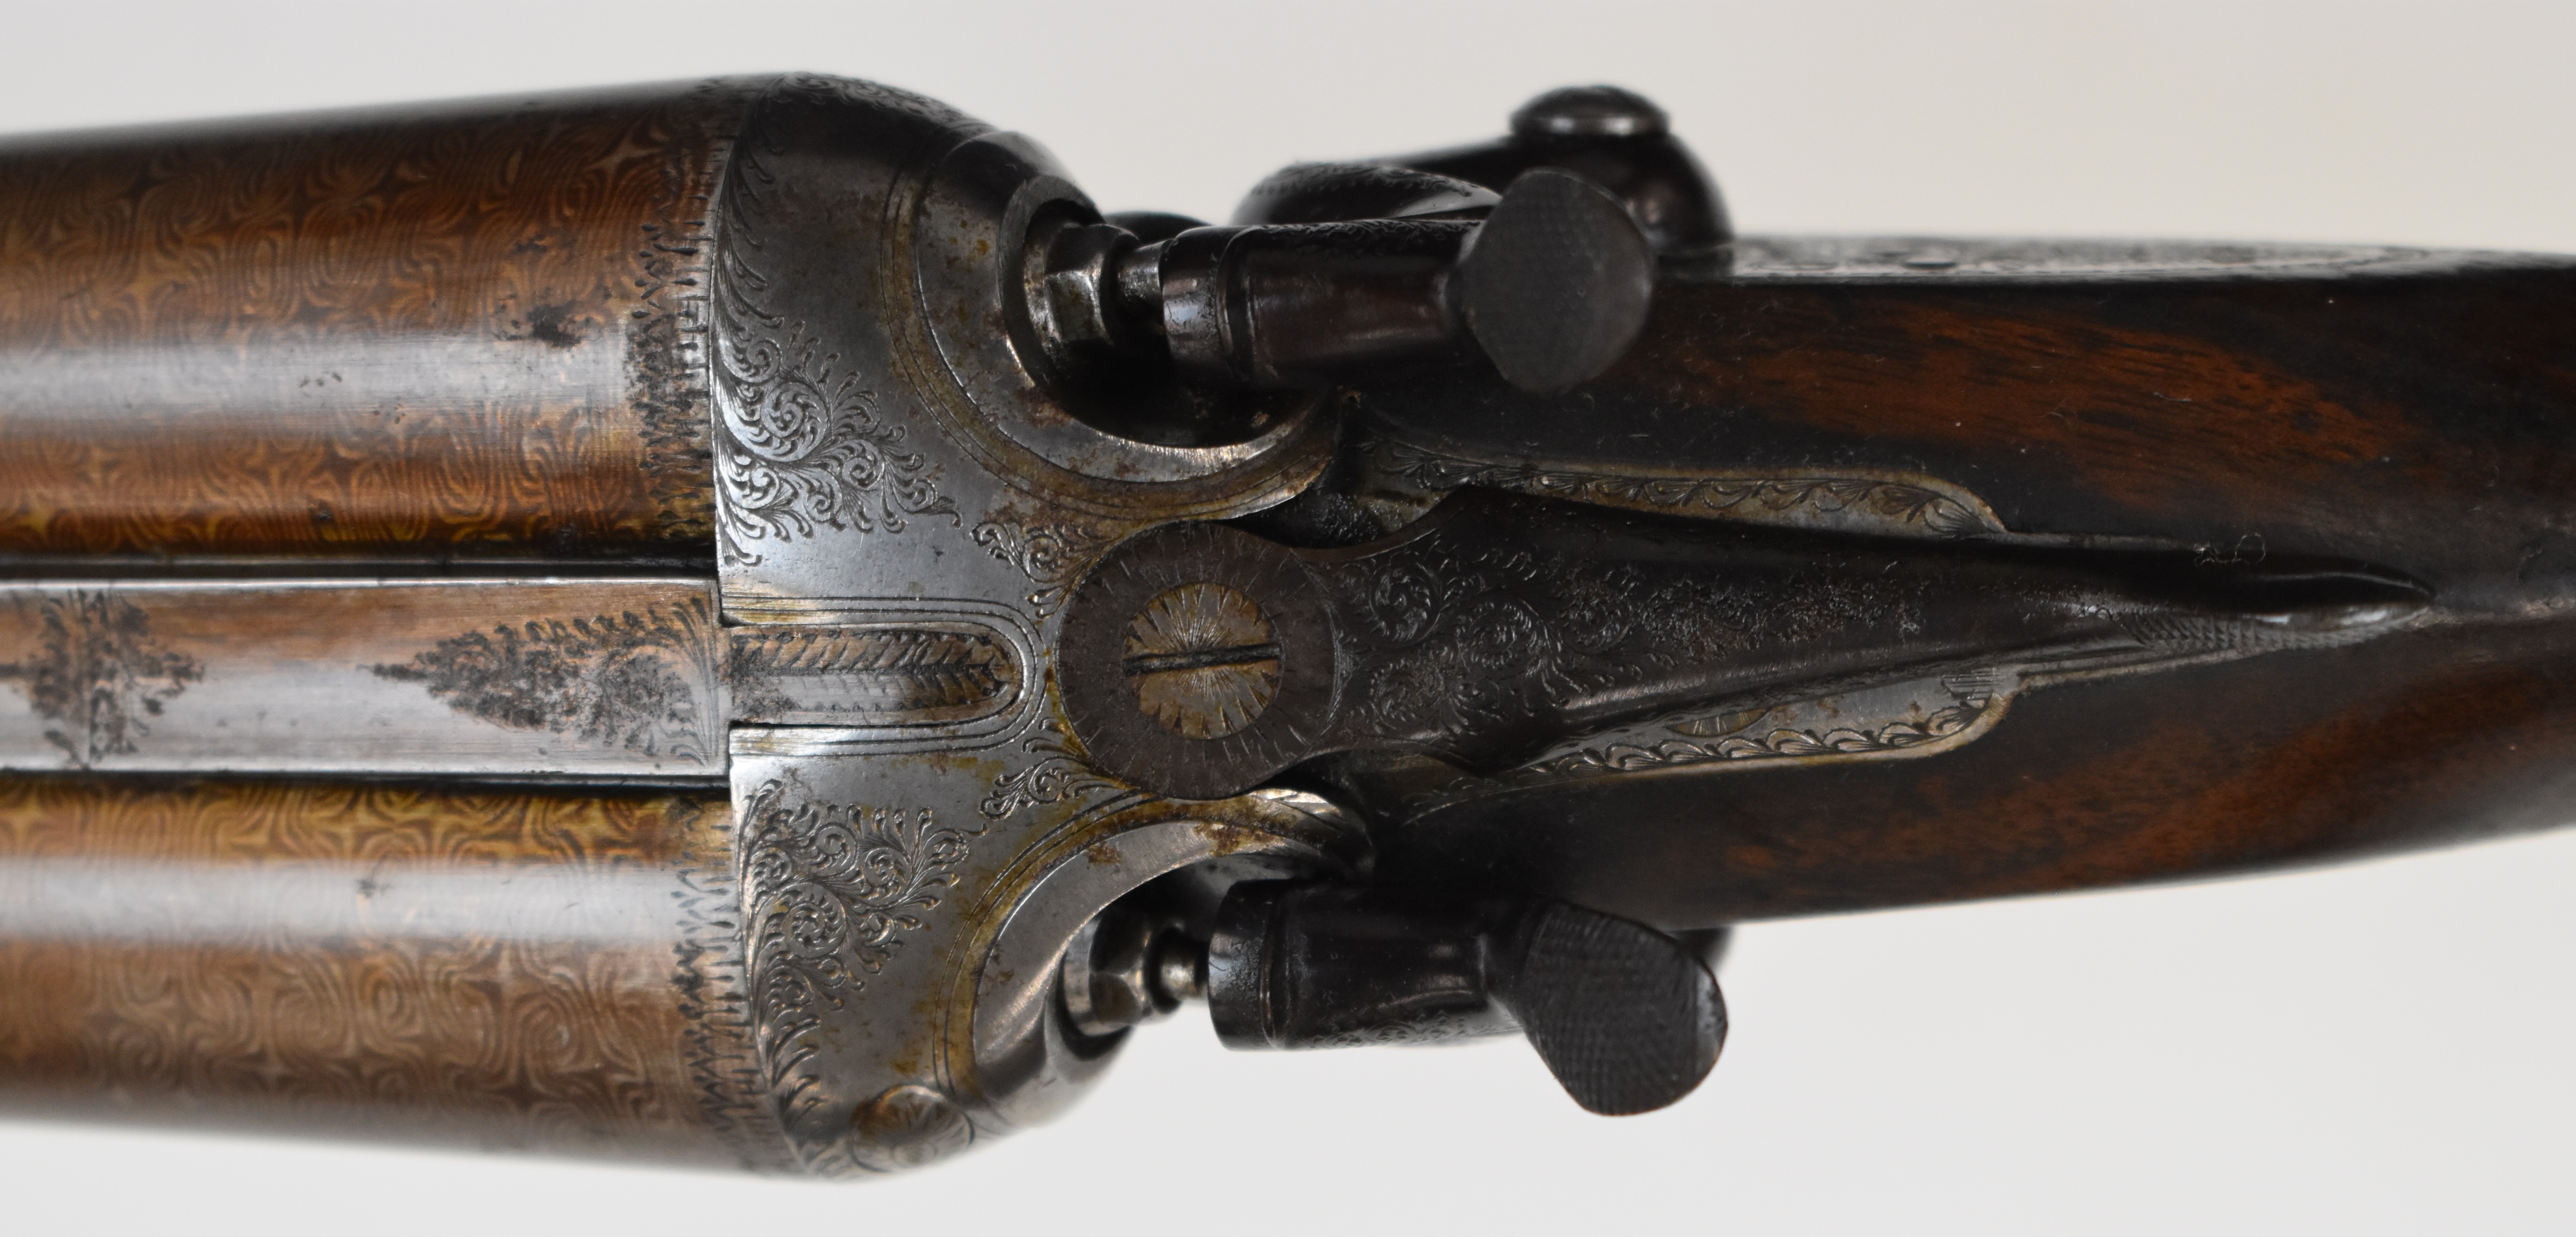 Cogswell & Harrison 12 bore side by side hammer action shotgun with named and engraved locks, - Image 8 of 12